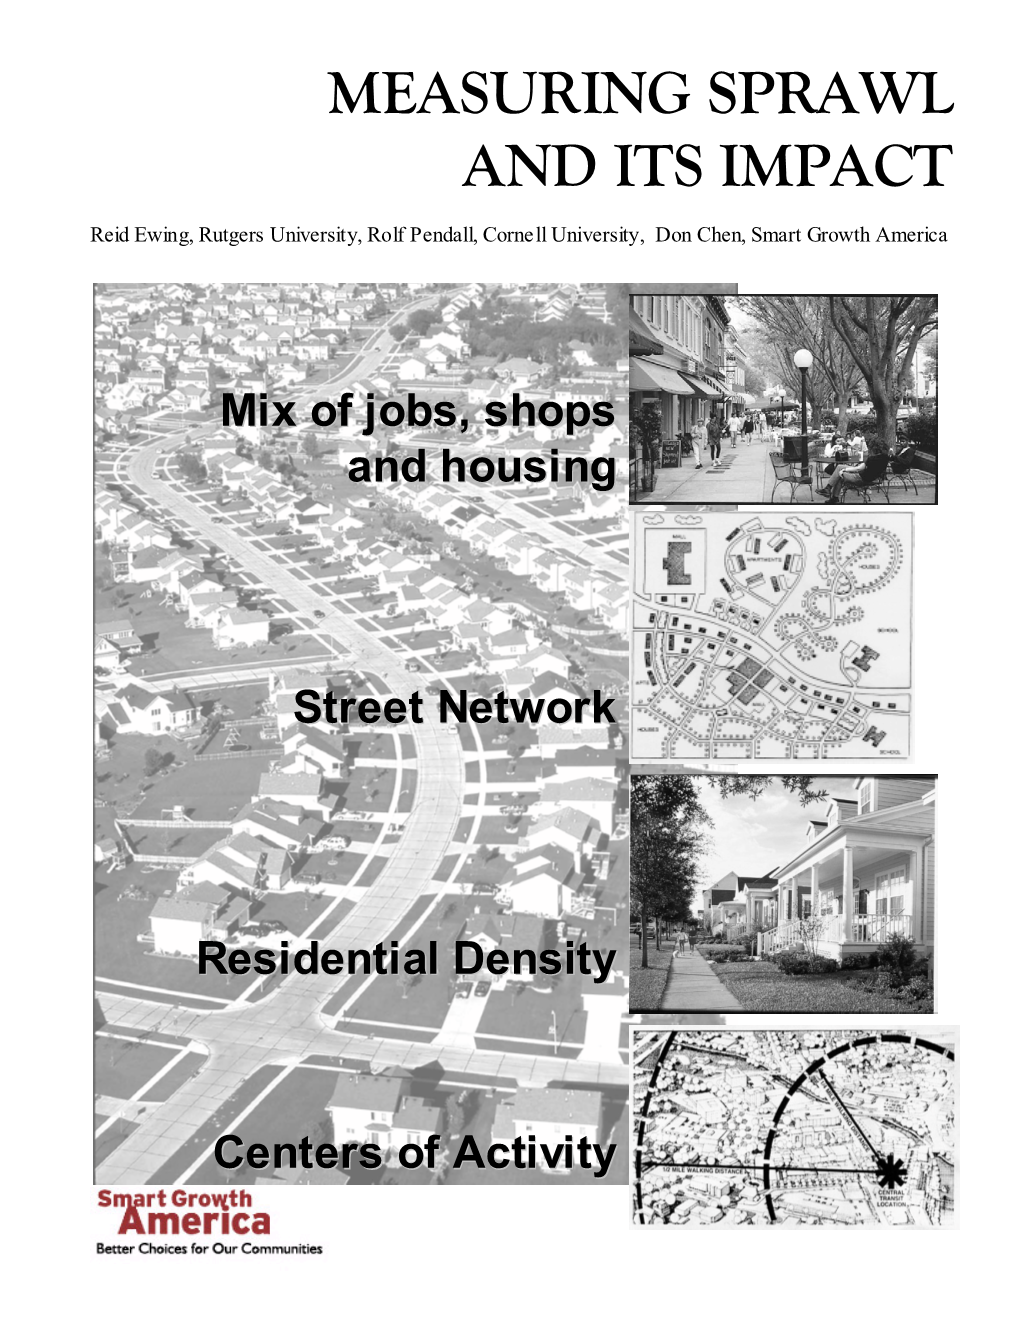 Measuring Sprawl and Its Impact